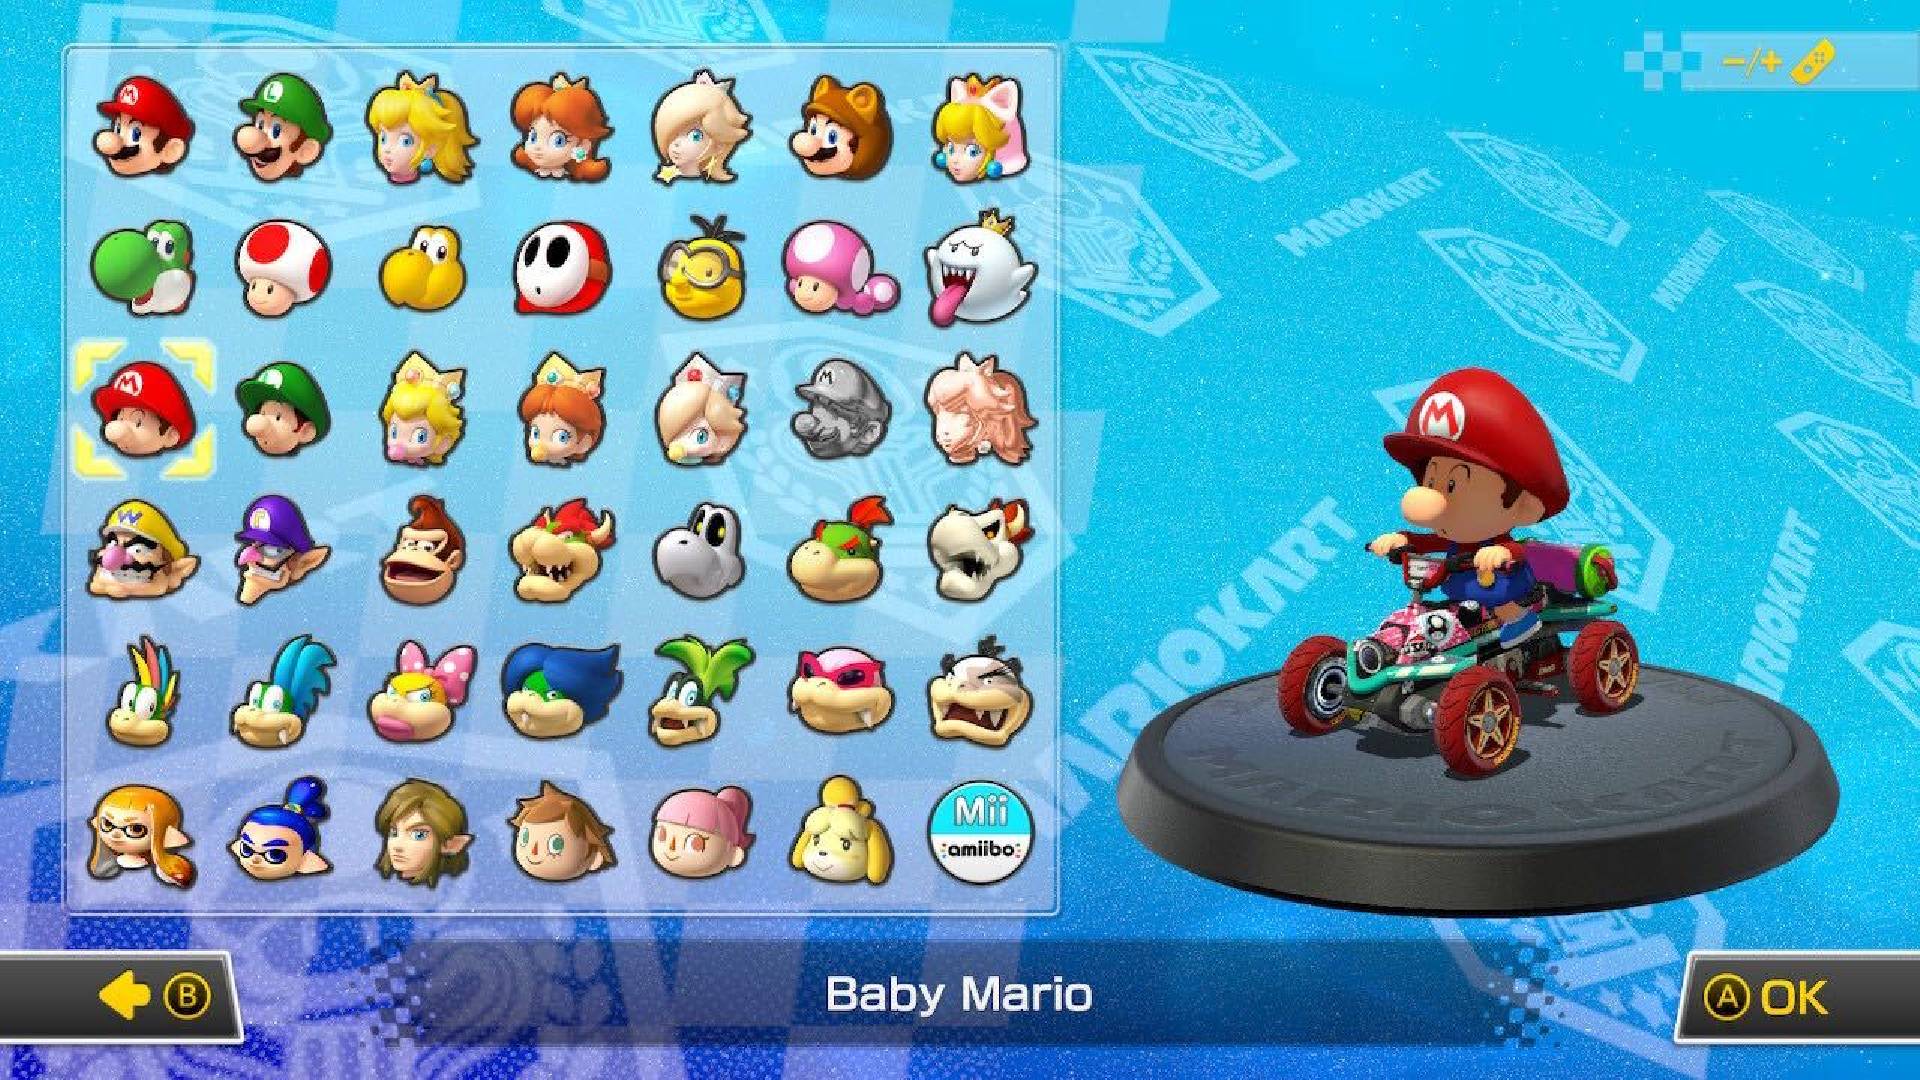 links Lam microscopisch Mario Kart characters guide – keep track of everyone | Pocket Tactics